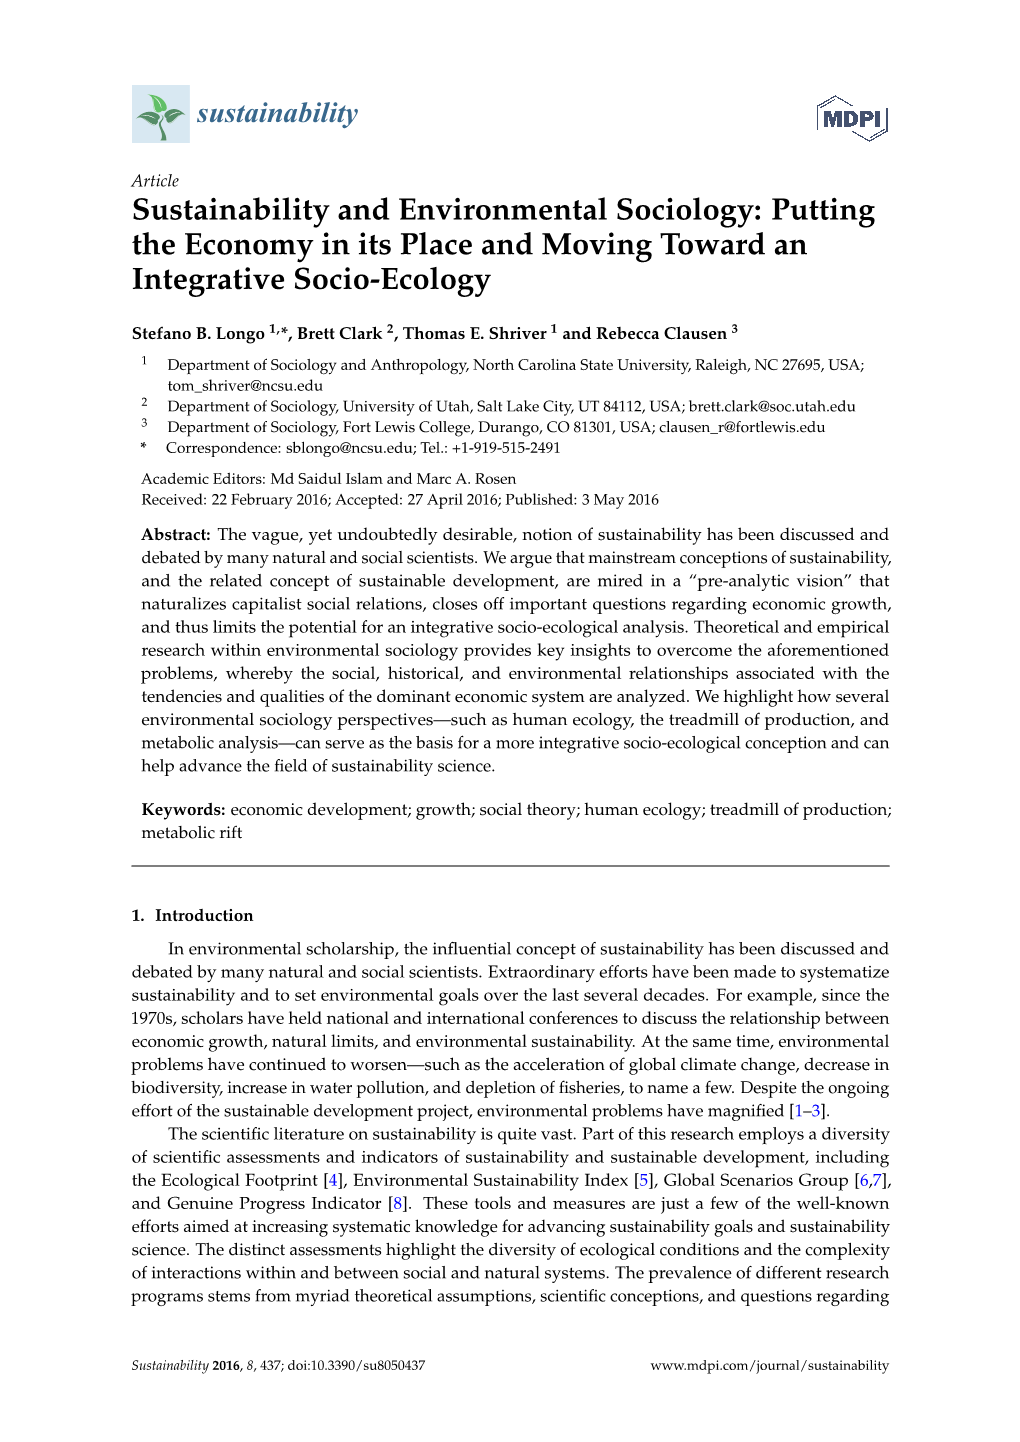 Sustainability and Environmental Sociology: Putting the Economy in Its Place and Moving Toward an Integrative Socio-Ecology